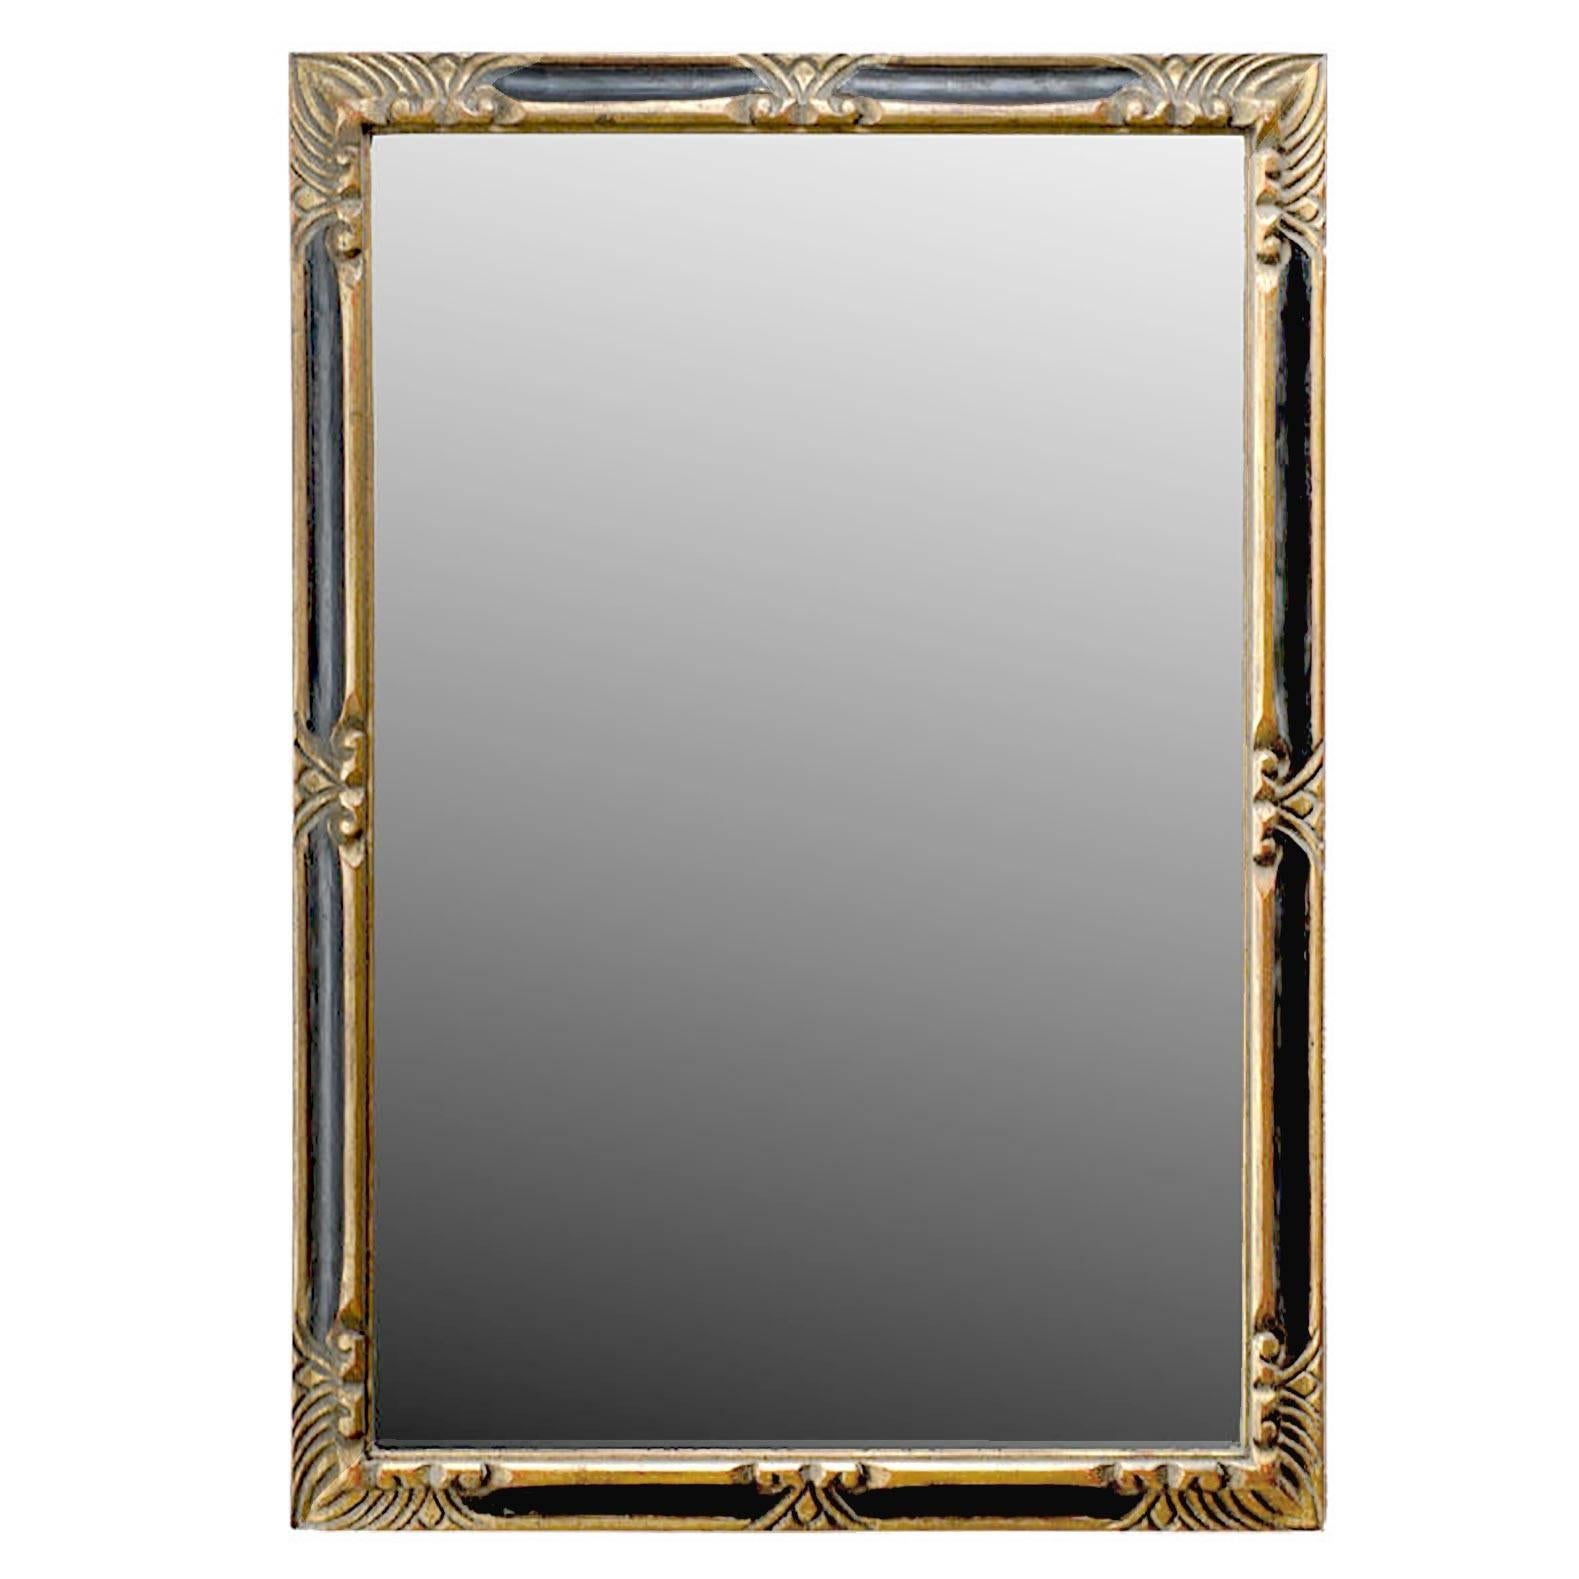 Ebonized and Gilt Hand-Carved Wood Wall Mirror by Jack Prager